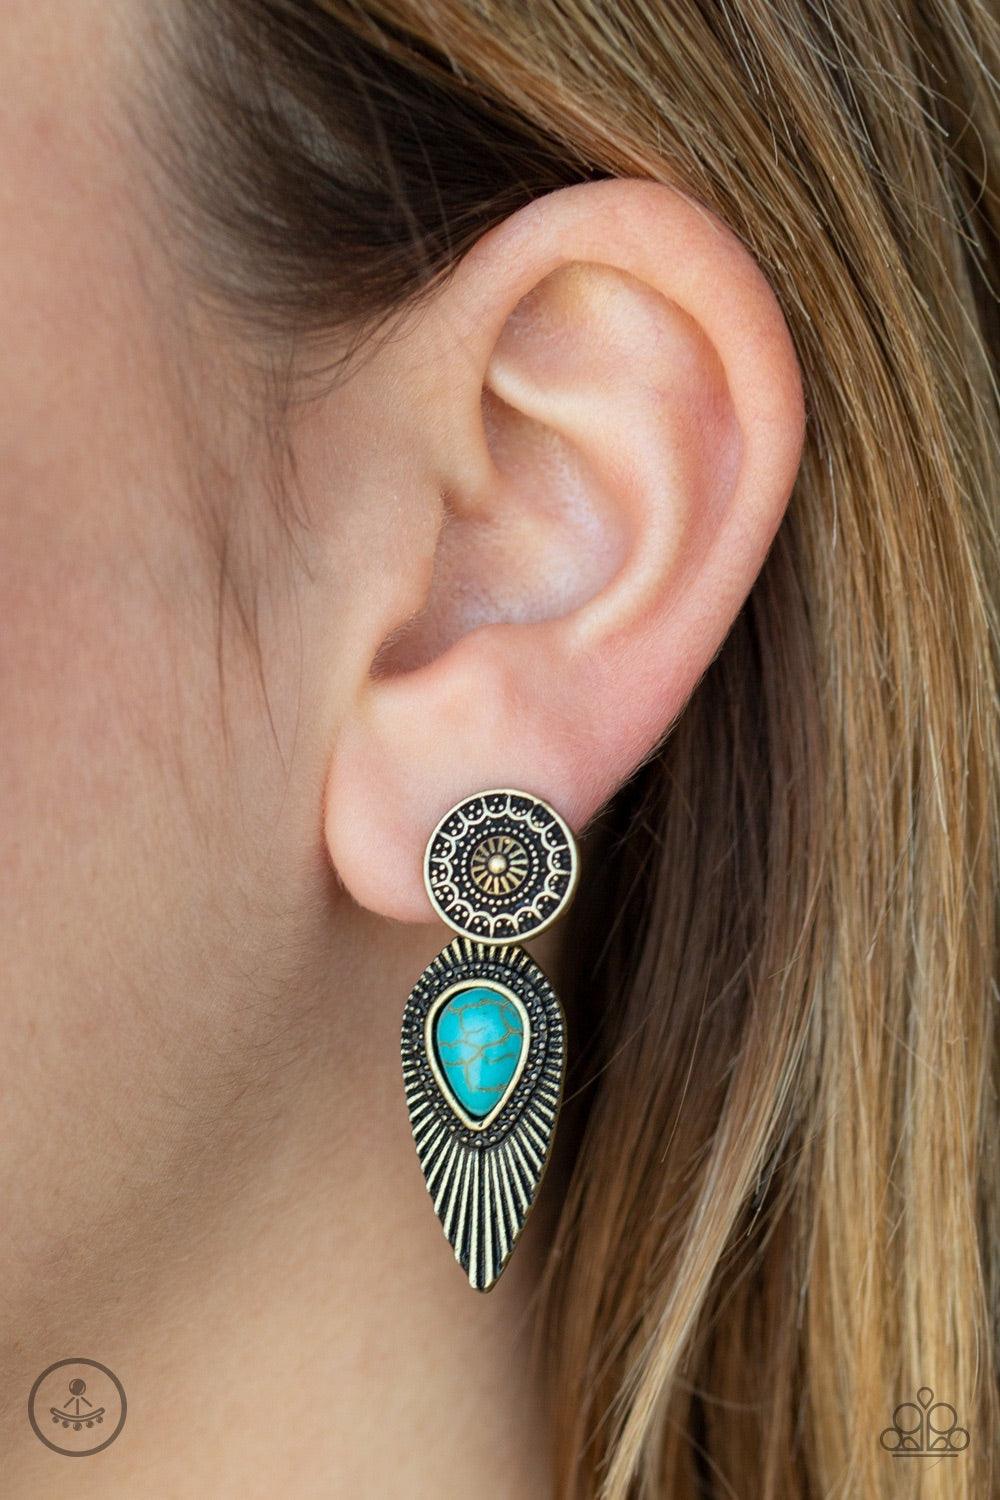 Paparazzi Accessories Fly Into The Sun - Brass An ornate brass disc attaches to a double-sided post, designed to fasten behind the ear. Dotted with a turquoise stone center, the feathery double-sided post peeks out beneath the ear for a bold artisan look.